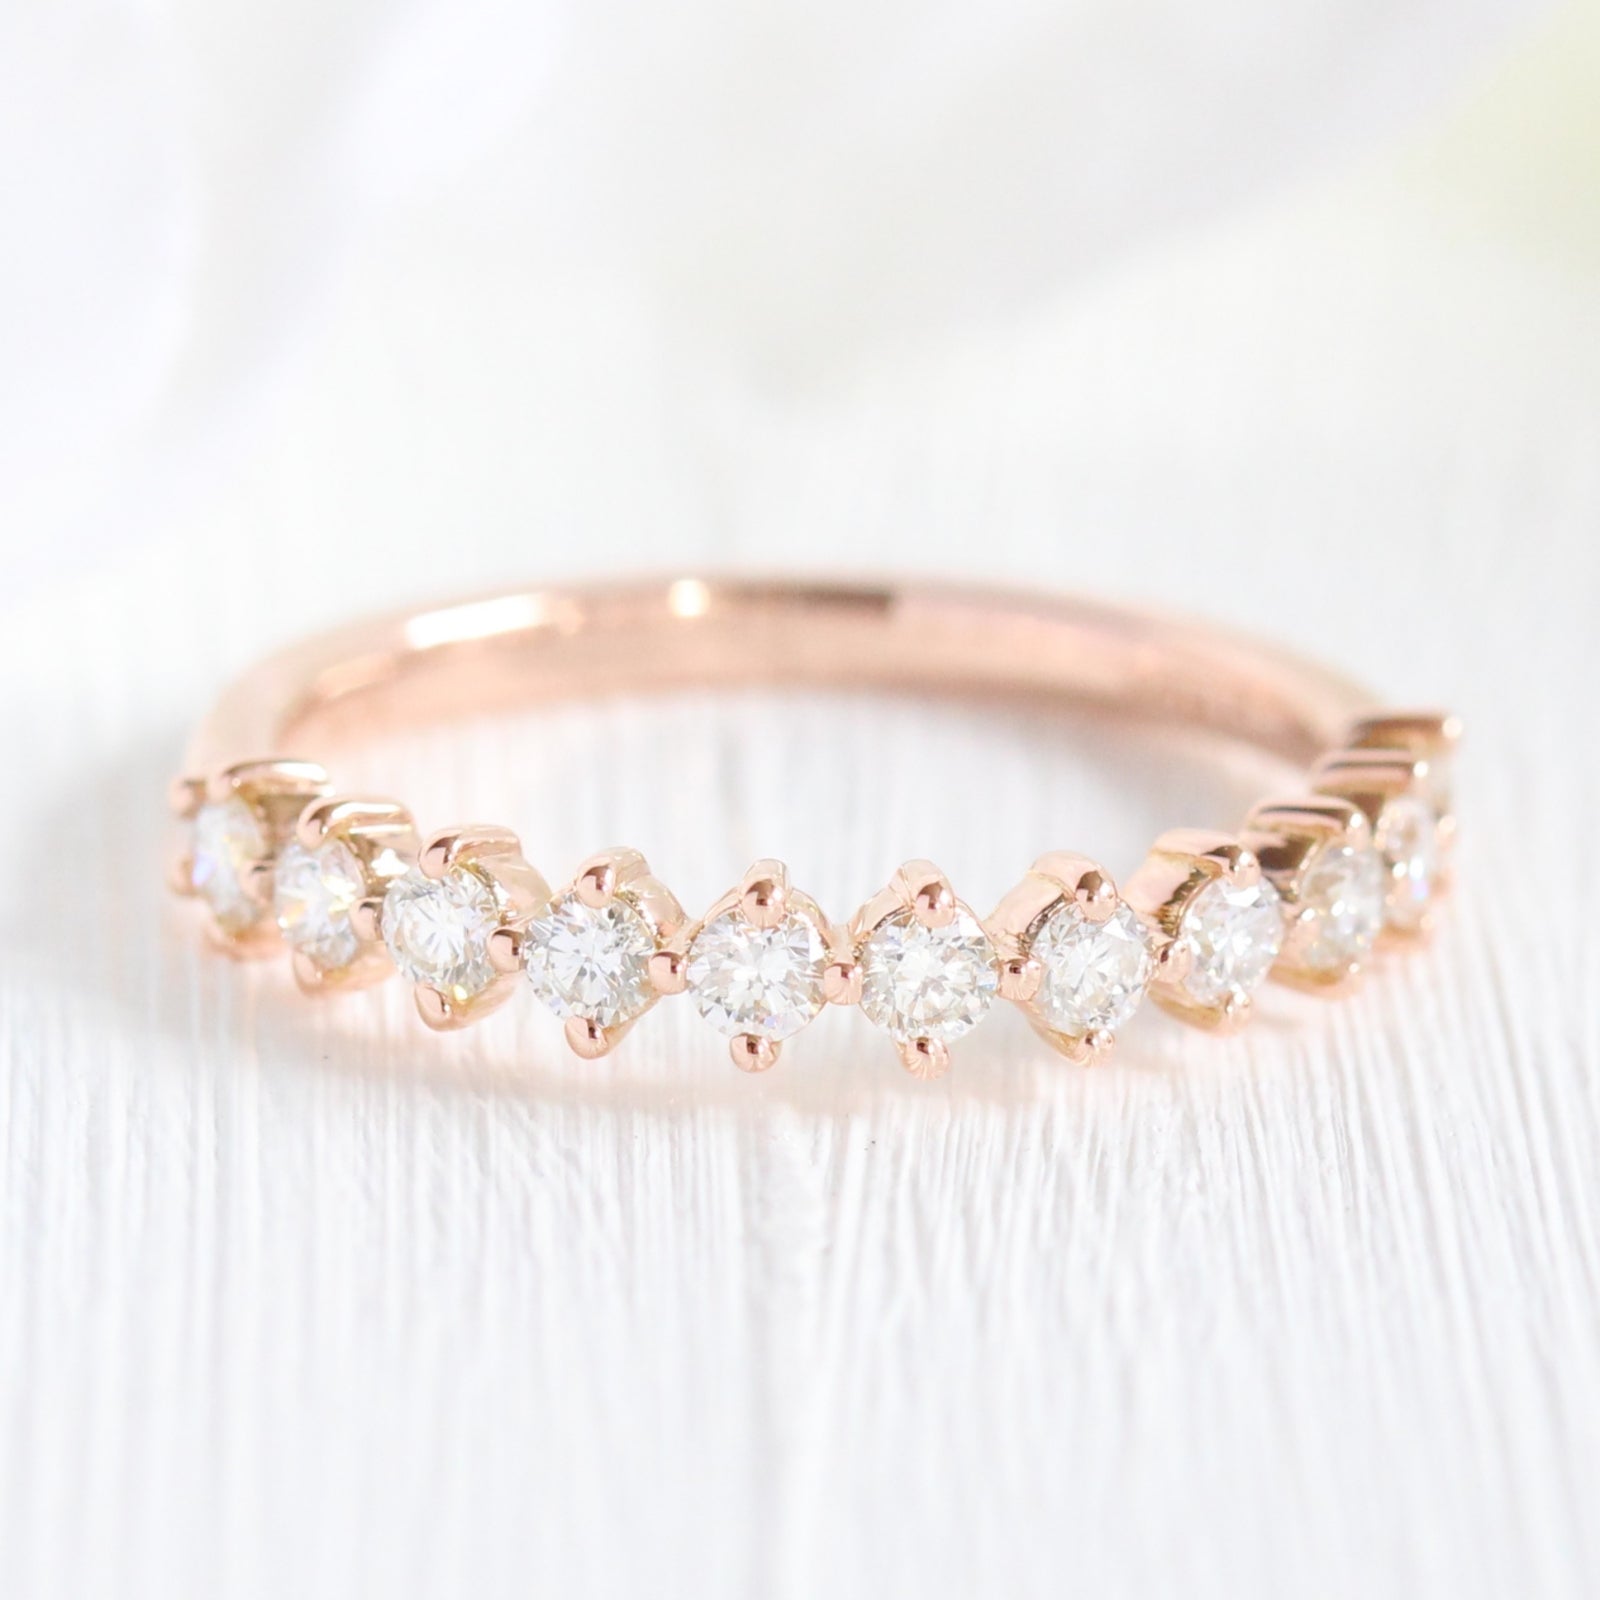 4 Prong Diamond Wedding Ring Rose Gold in Half Eternity Wedding Band by La More Design Jewelry